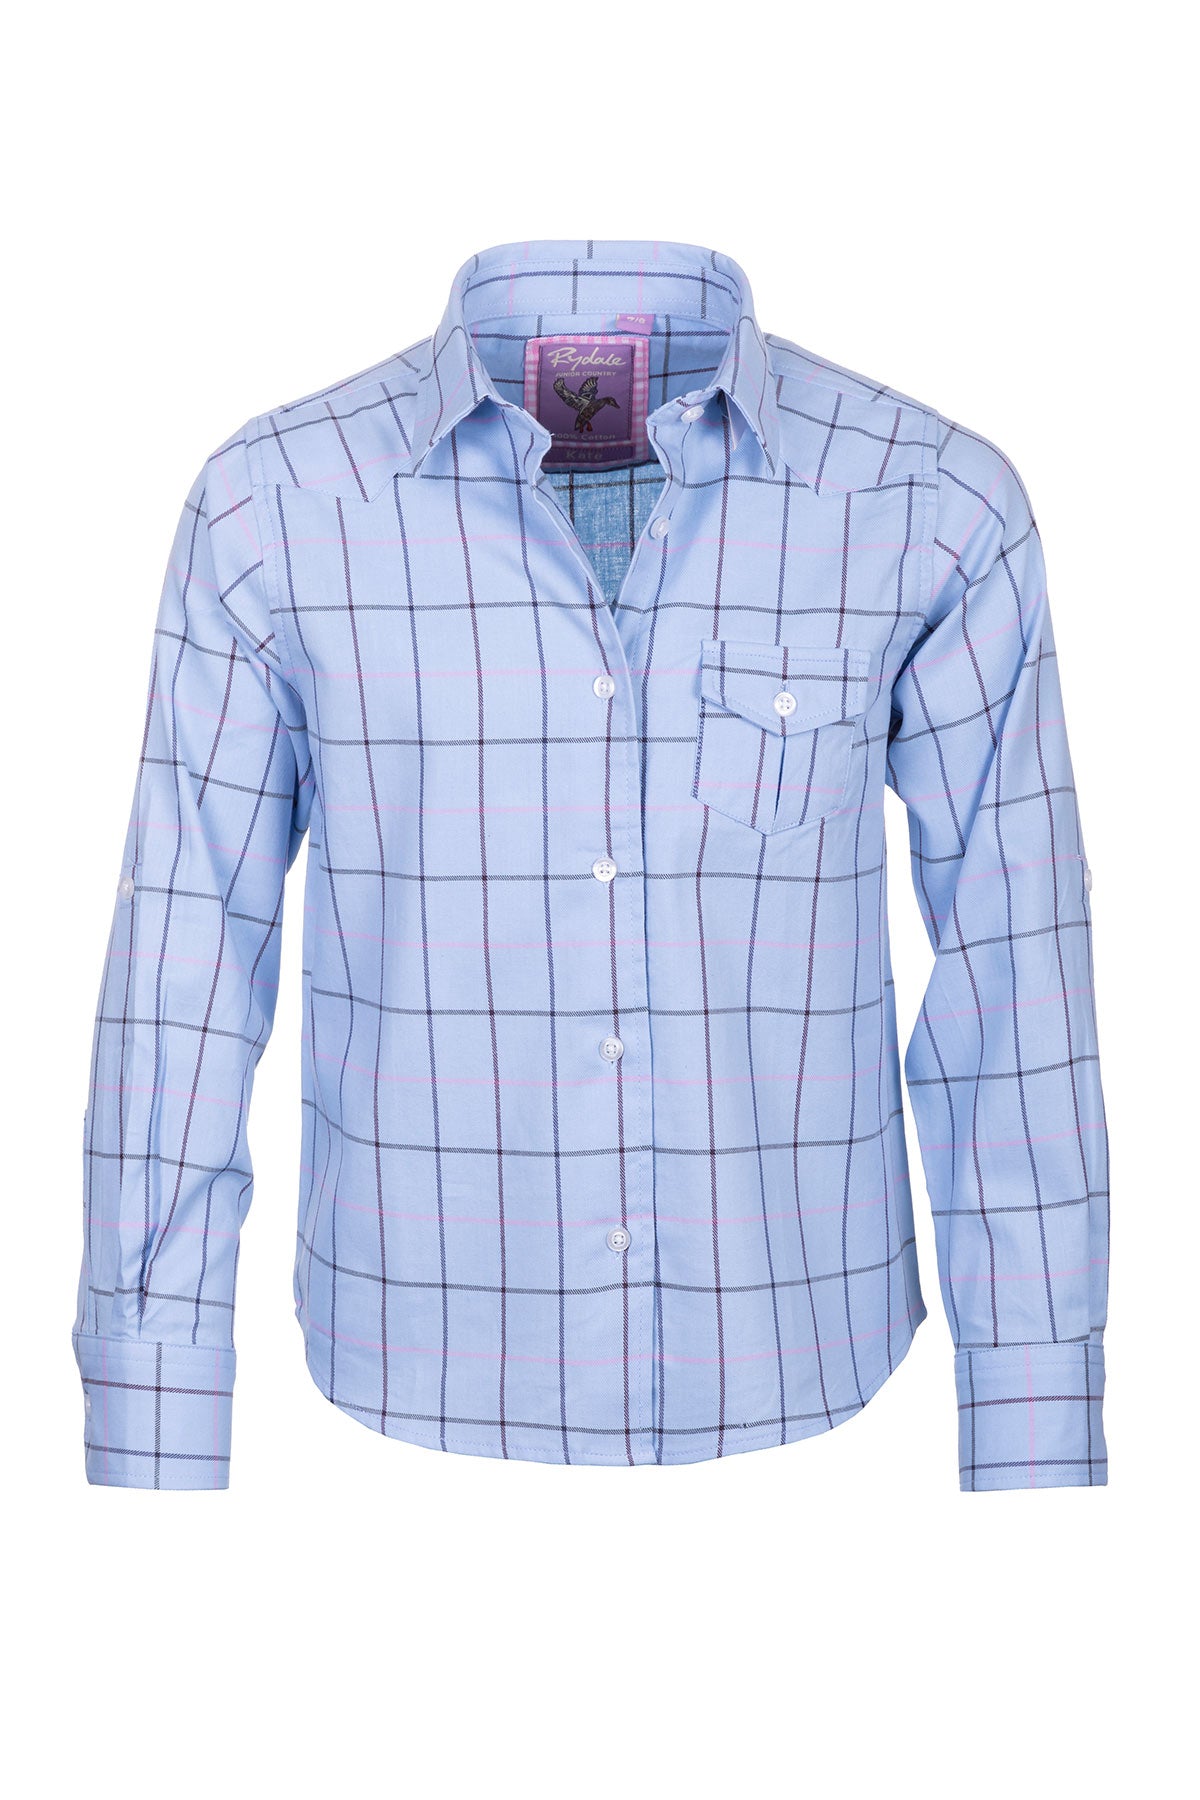 Girls Check Shirt UK | Country Checked Shirts for Girls | Rydale